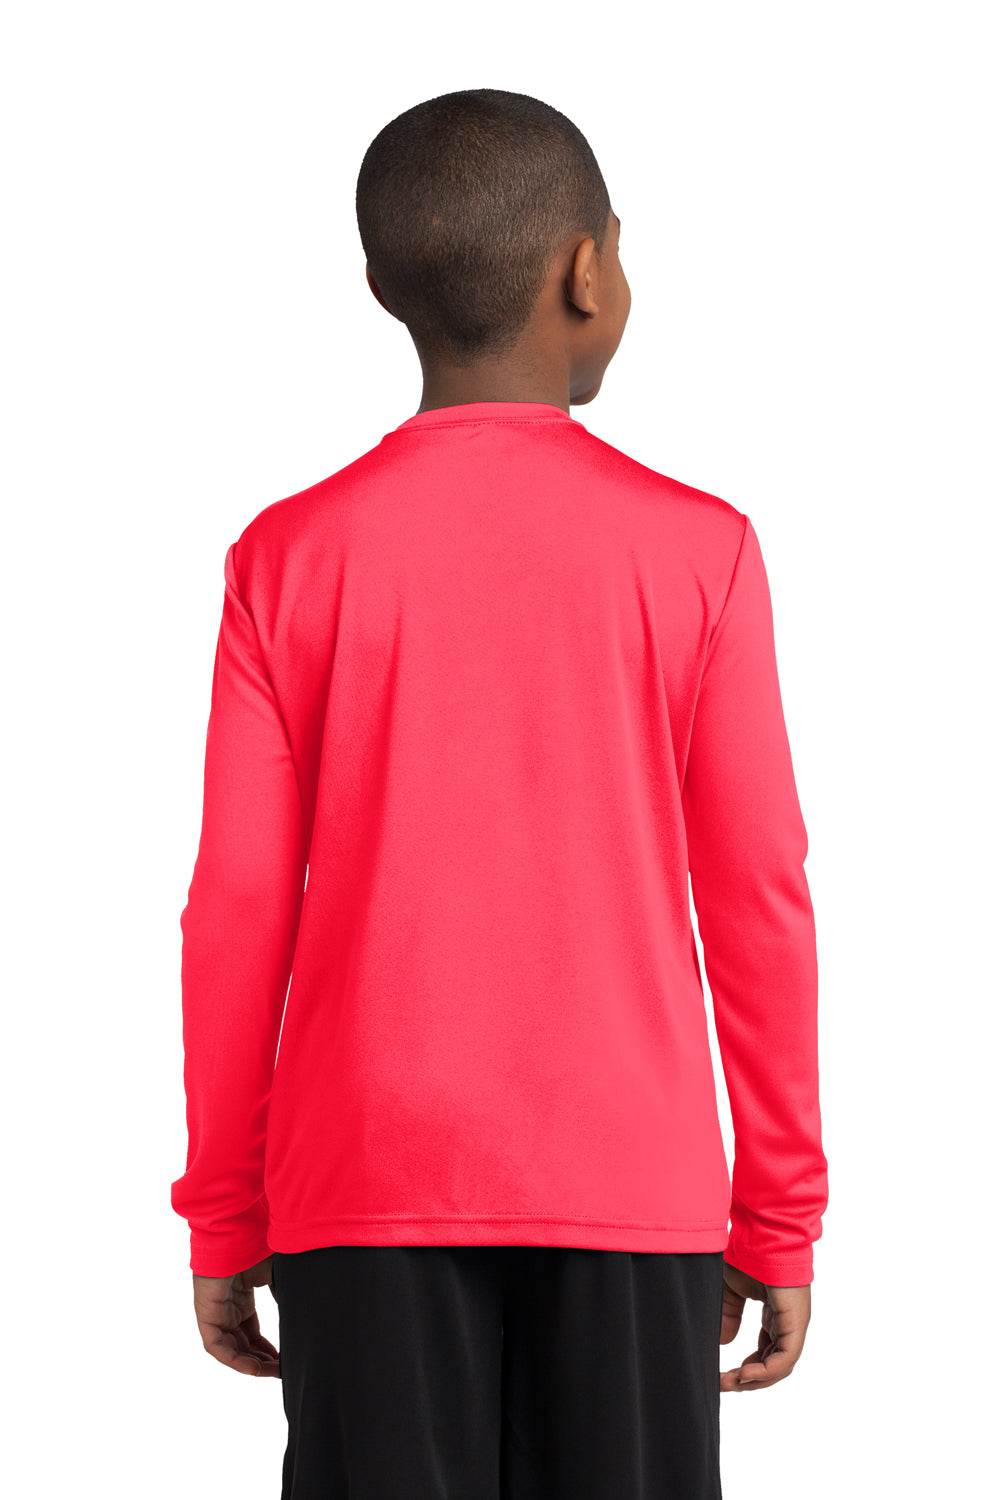 Sport-Tek YST350LS Youth Competitor Moisture Wicking Long Sleeve Crewneck T-Shirt Hot Coral Pink Back